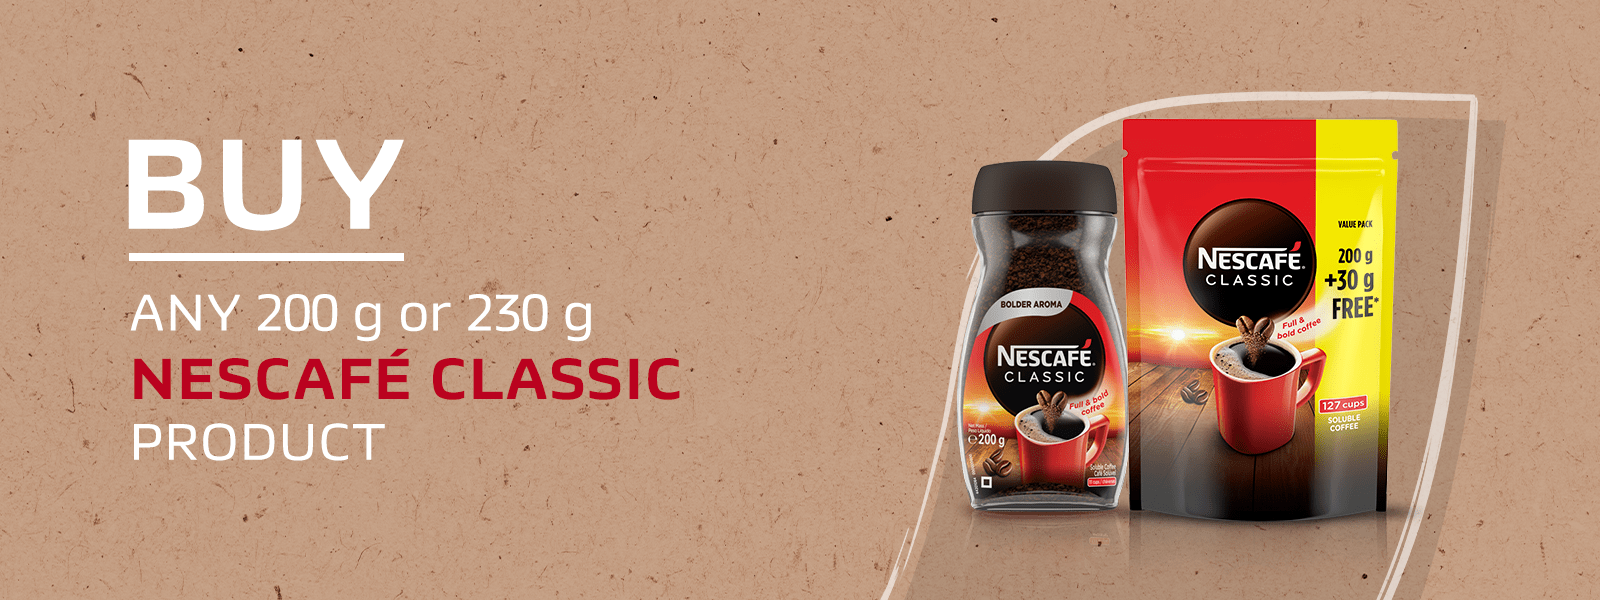 NESCAFE CLASSIC WVD PRODUCT PAGE